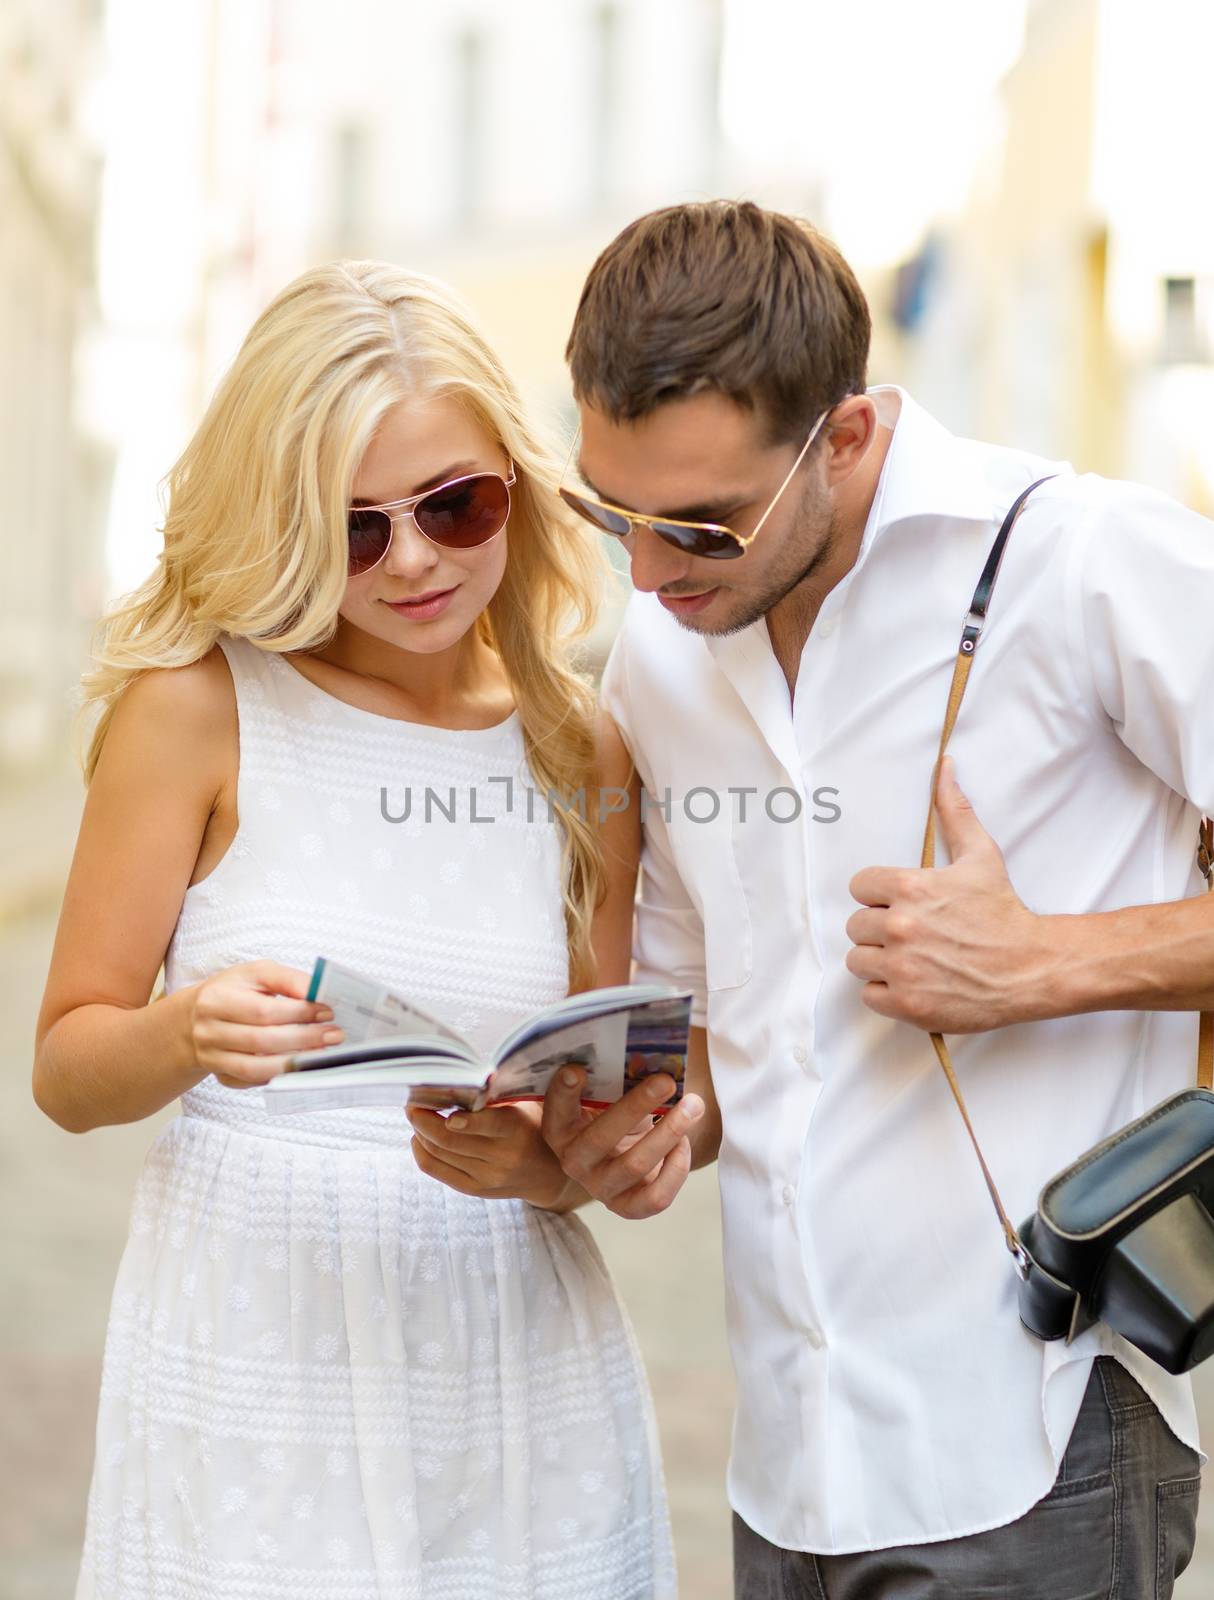 summer holidays, dating, city break and tourism concept - couple with map, camera and travellers guide